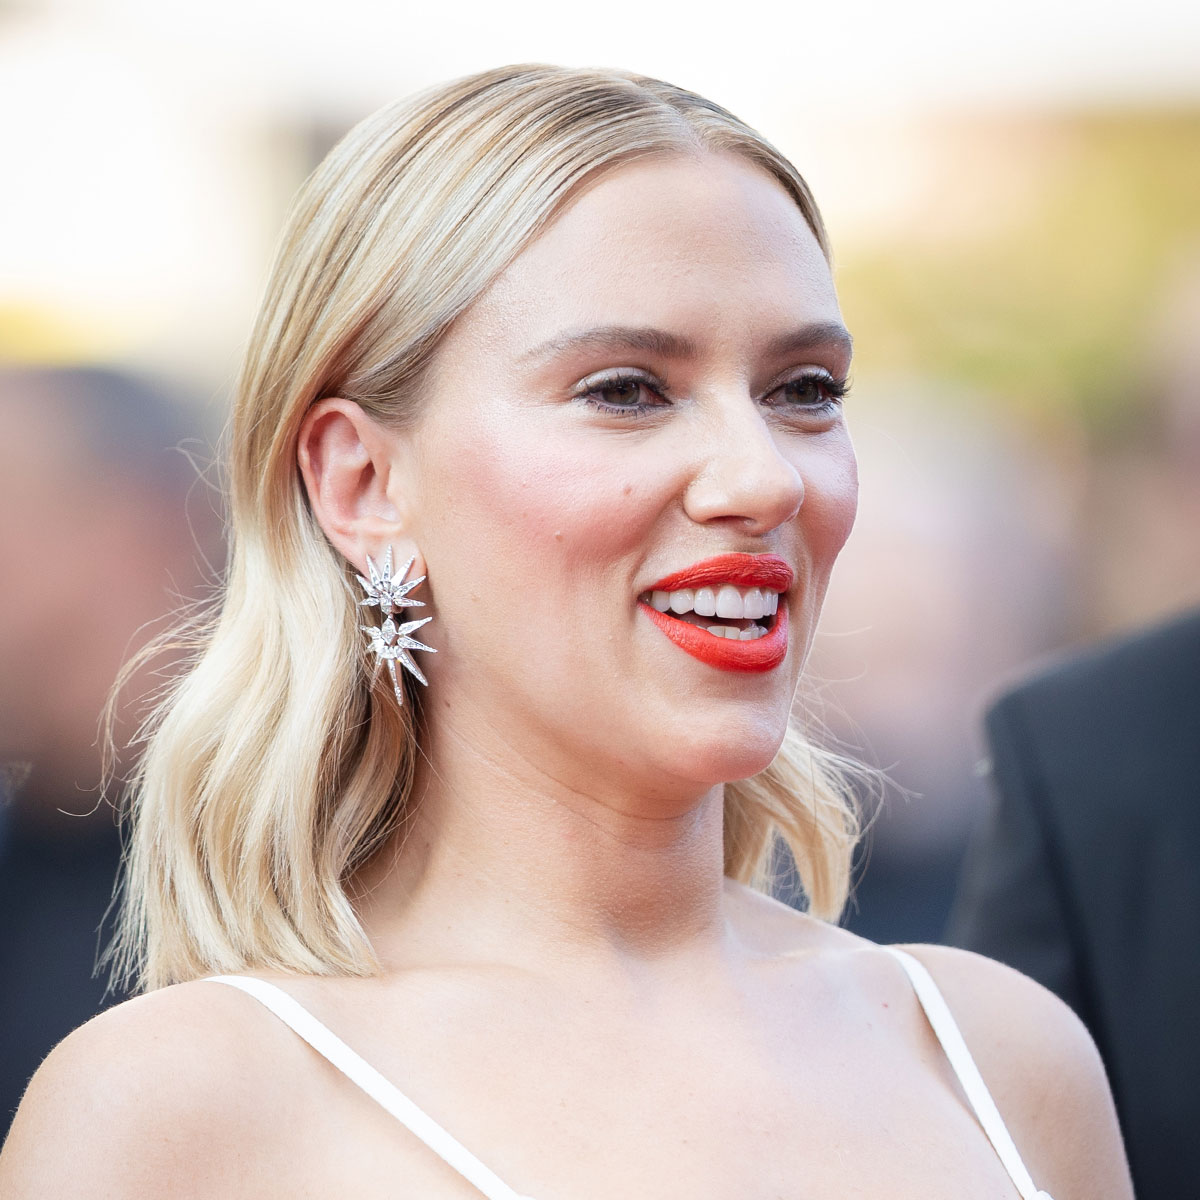 Scarlett Johansson - 38: the most famous photos of the actress